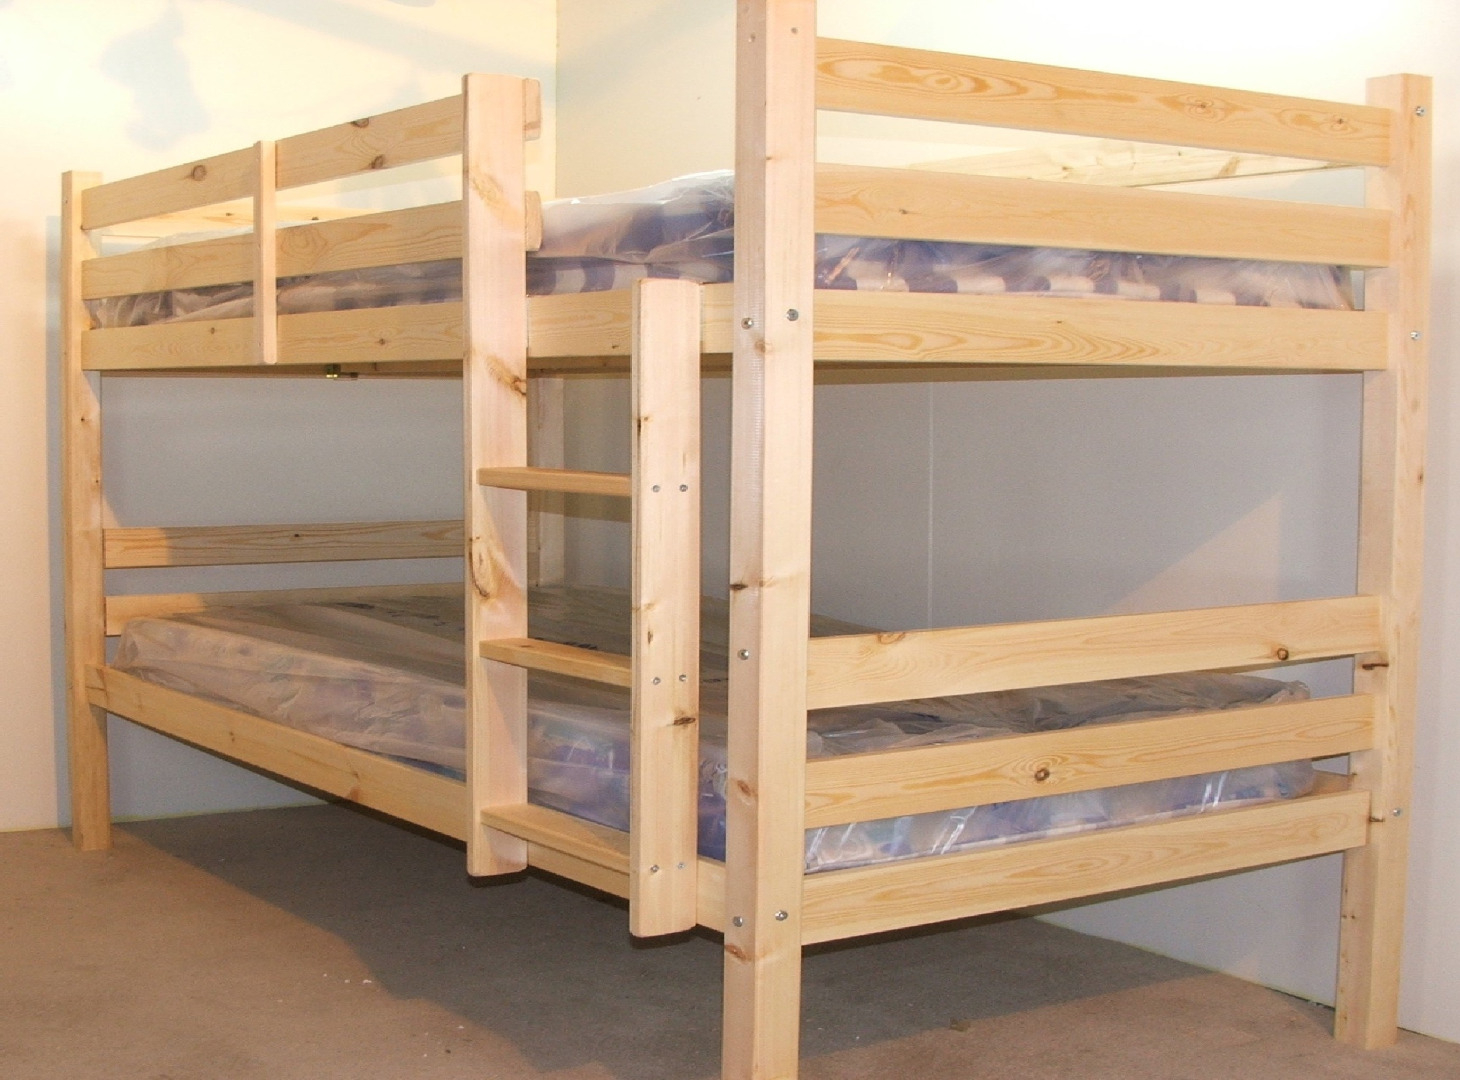 Heavy Duty Bunk Beds Visualhunt, Heavy Duty Bunk Beds Twin Over Full